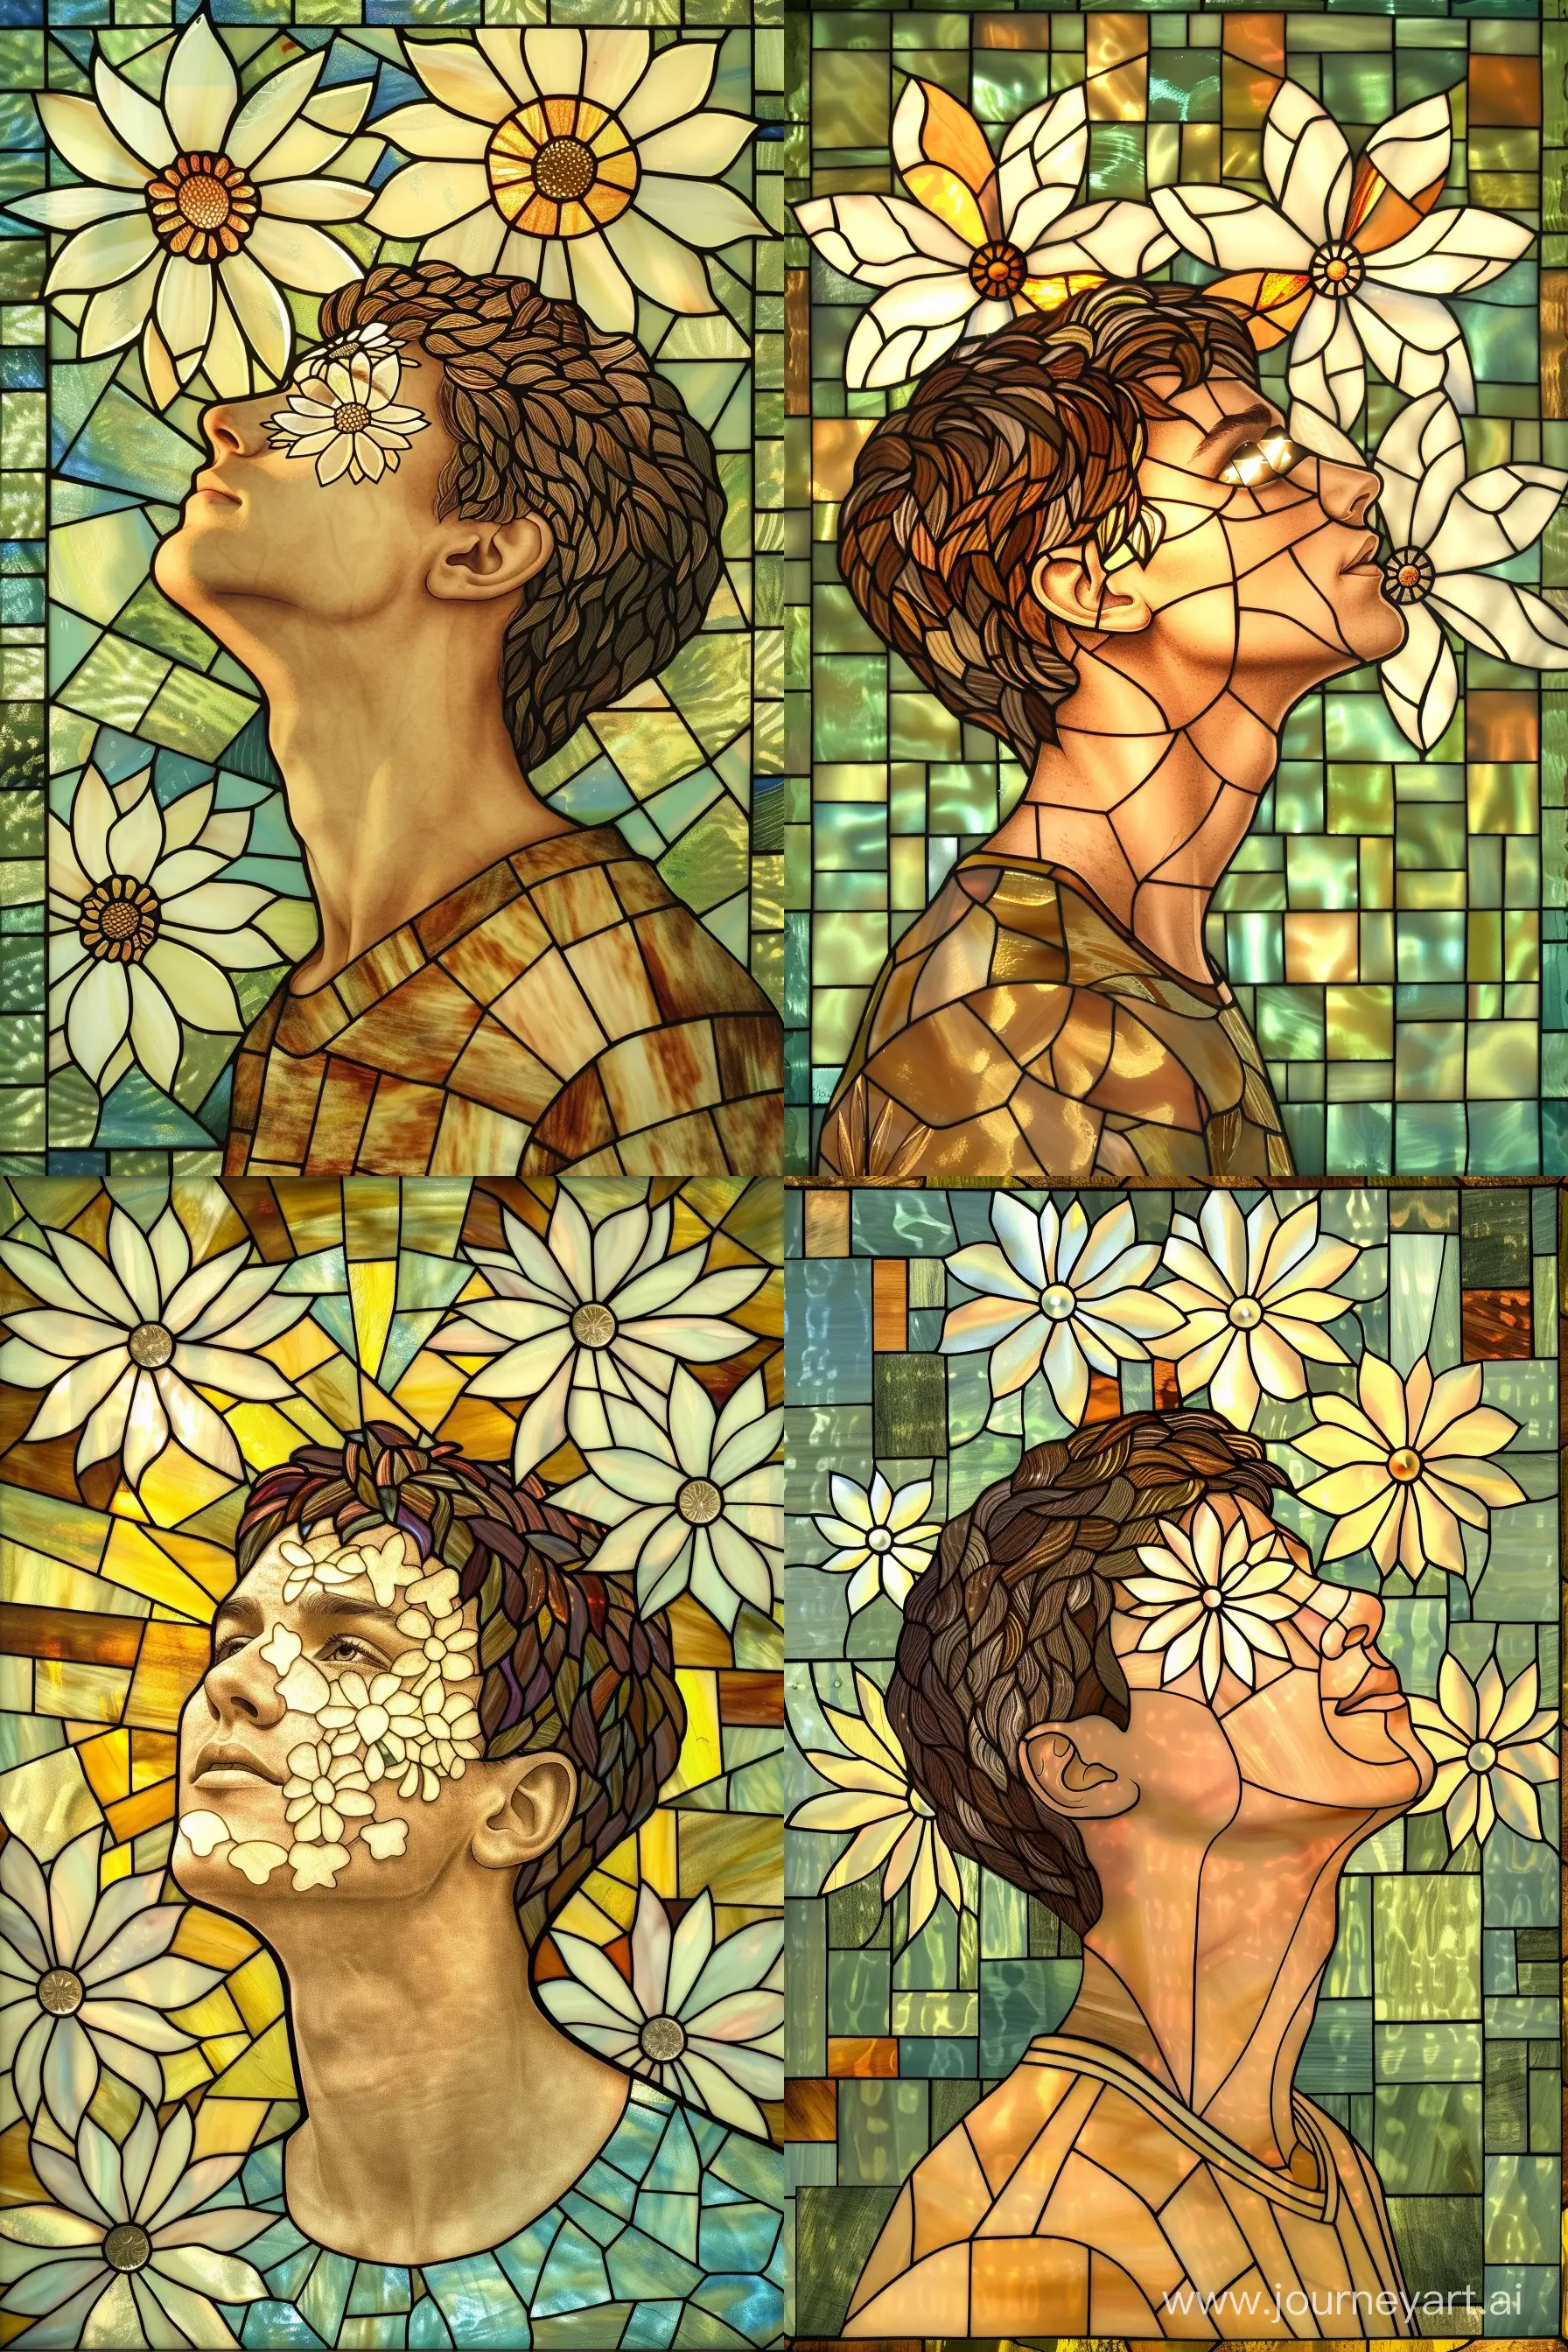 a man, slightly facing upwards, with short, dark, wavy hair. No T shirt,his eyes are covered with white flowers,the flowers are large with multiple petals, Stained glass art, square shape --sref https://cdn.discordapp.com/attachments/1187305629551972372/1206110322973220904/Spirit_Of_Love.jpg?ex=65dad0c5&is=65c85bc5&hm=735e0215476dcd8471c65b6e40c353c13049f0a03fb027496150d8c53f5daac2& --sw 1000 --stylize 500 --iw 2 --ar 2:3